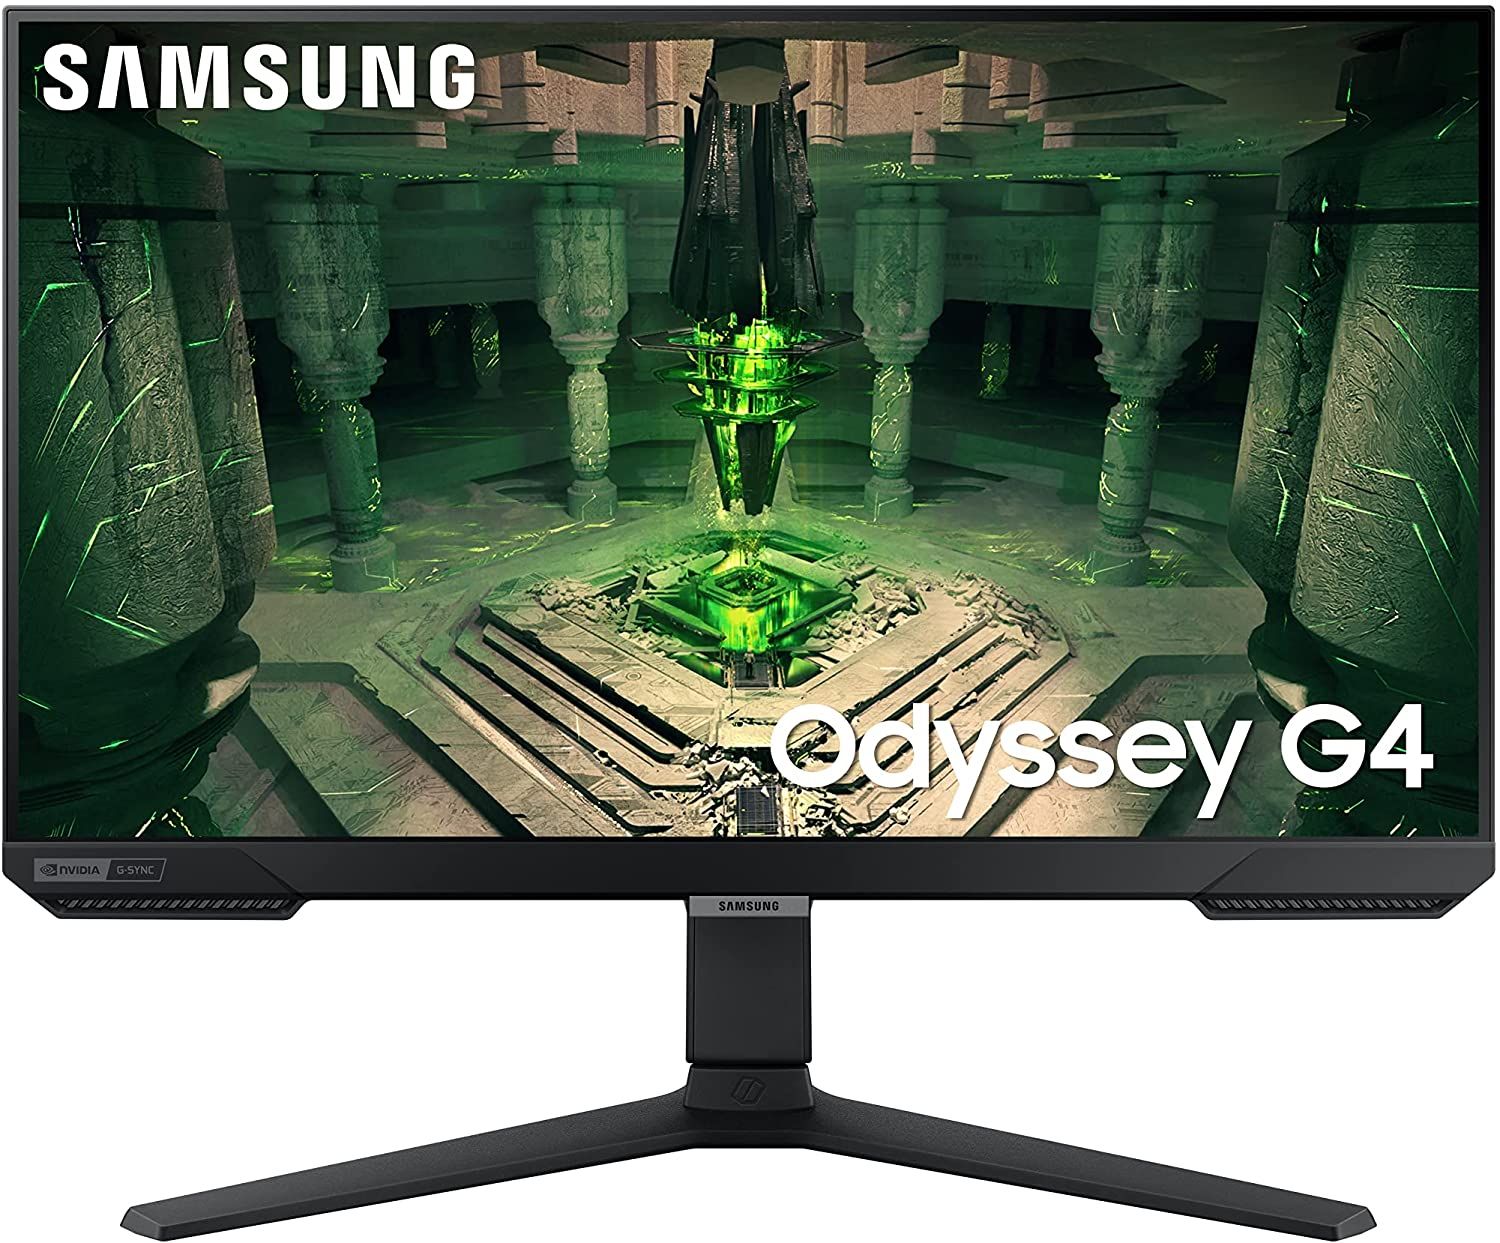 Save $100 on This 240 Hz Gaming Monitor From Samsung